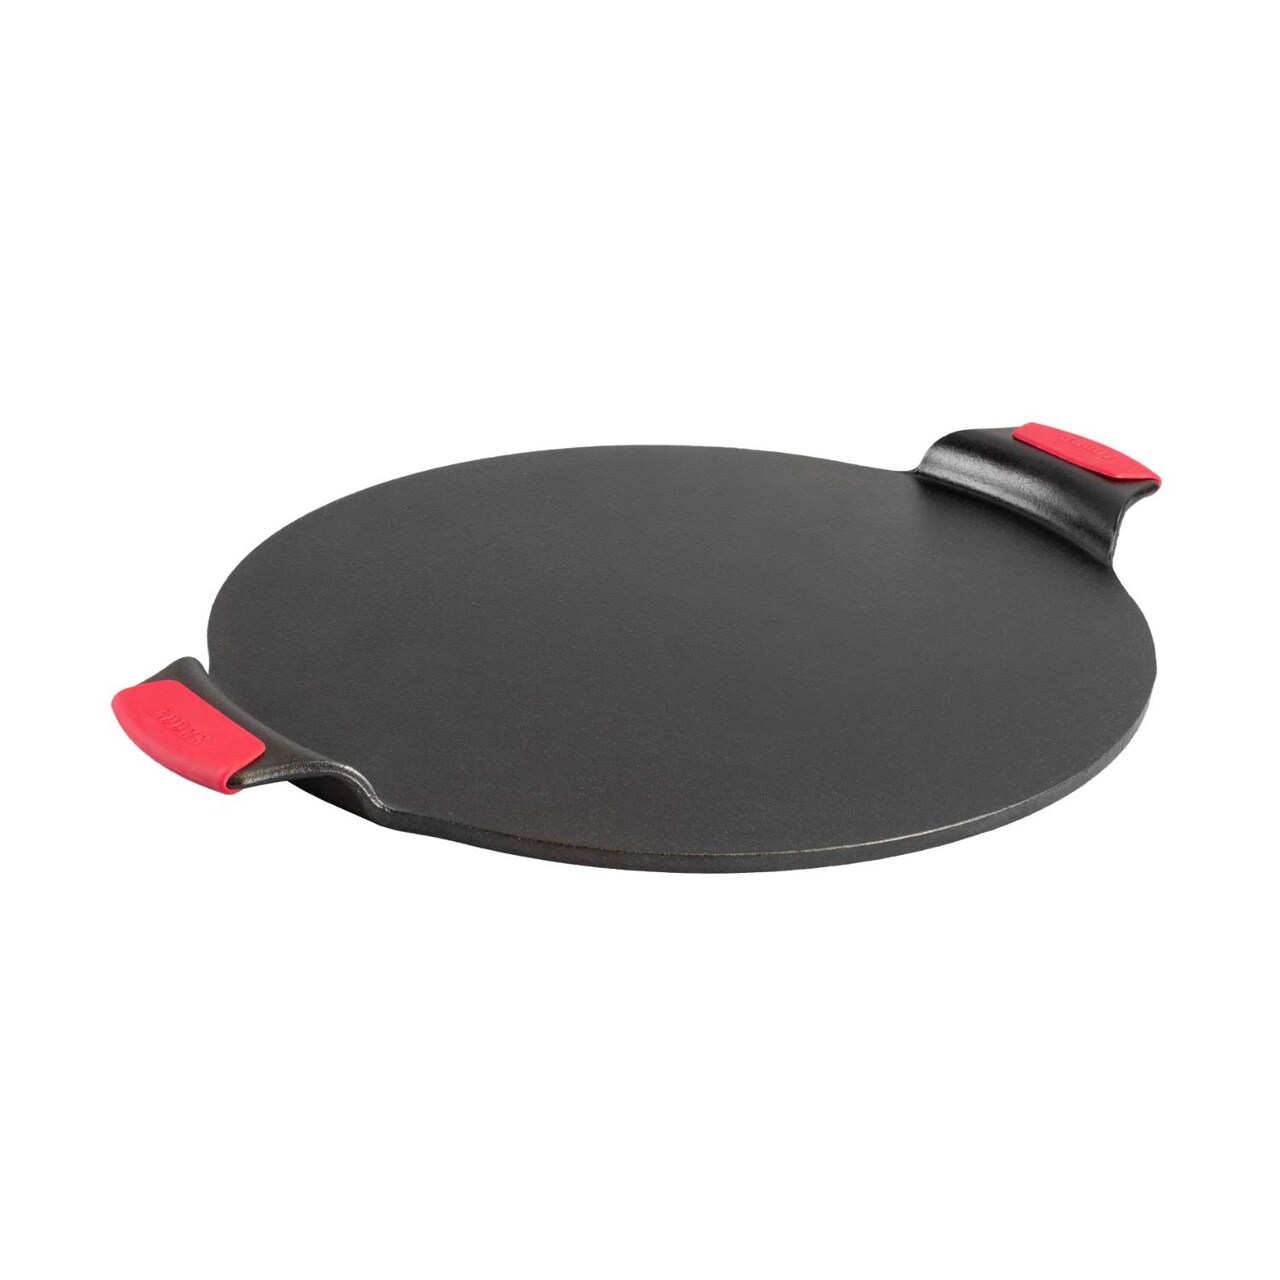 Lodge Cast Iron Pizza Pan Round Dual Handles Seasoned with Grips 15 inch